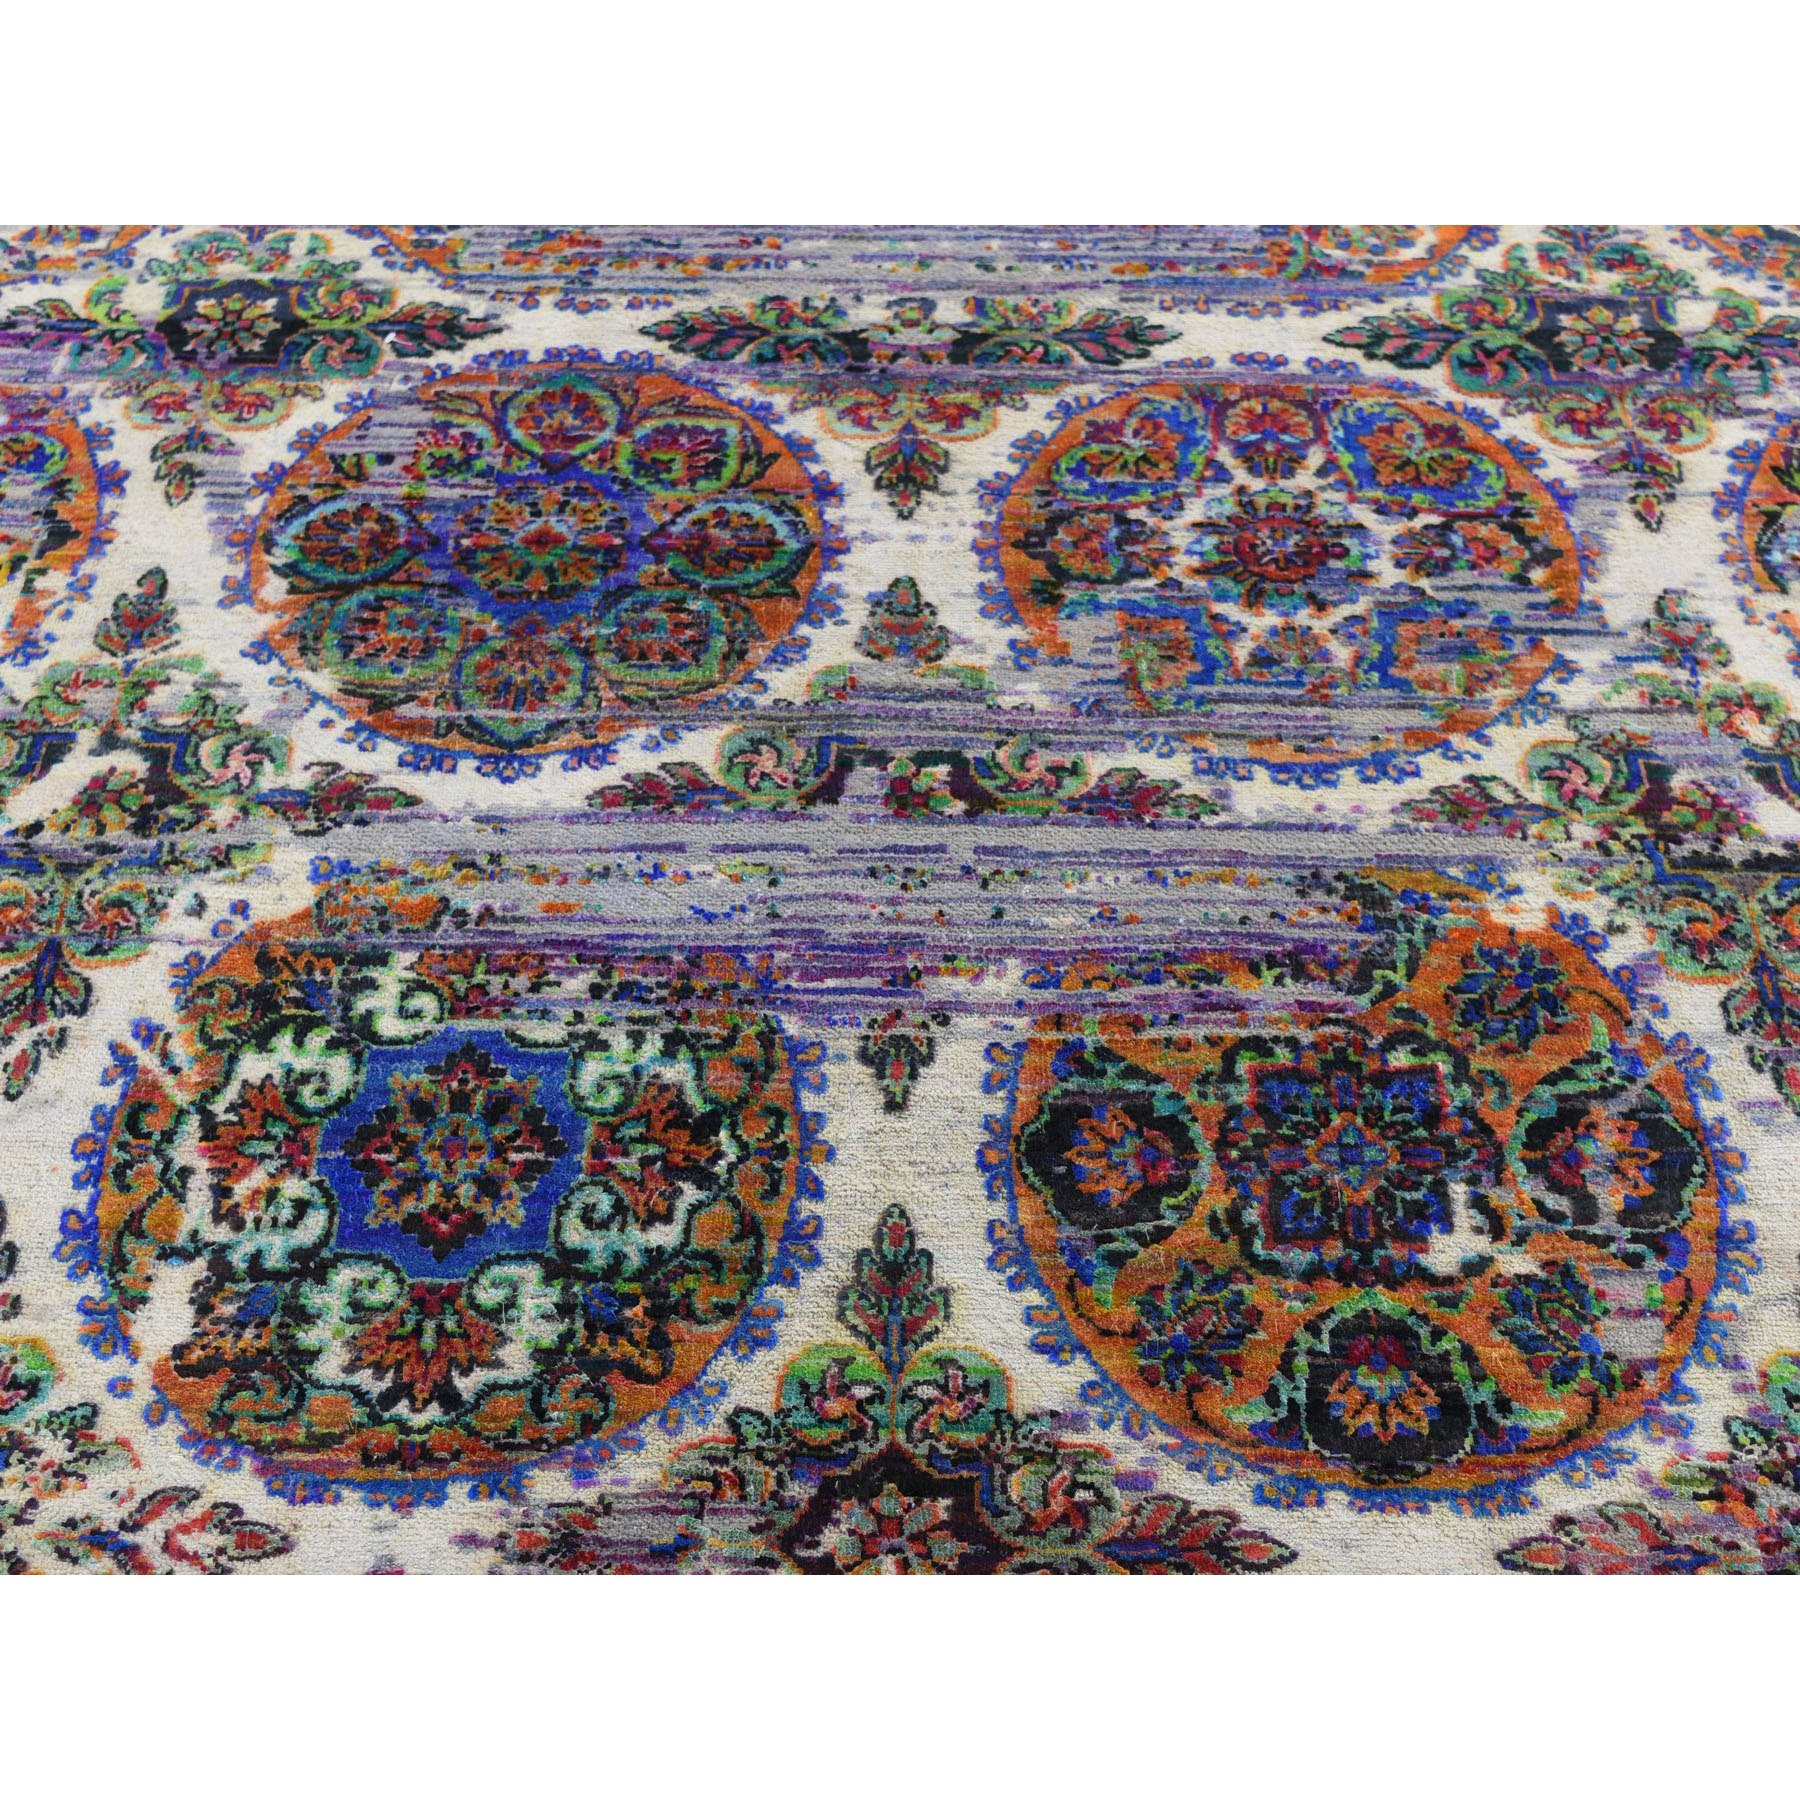 8-x10- ERASED ROSSETS, Colorful Sari Silk With Textured Wool Hand-Knotted Oriental Rug 